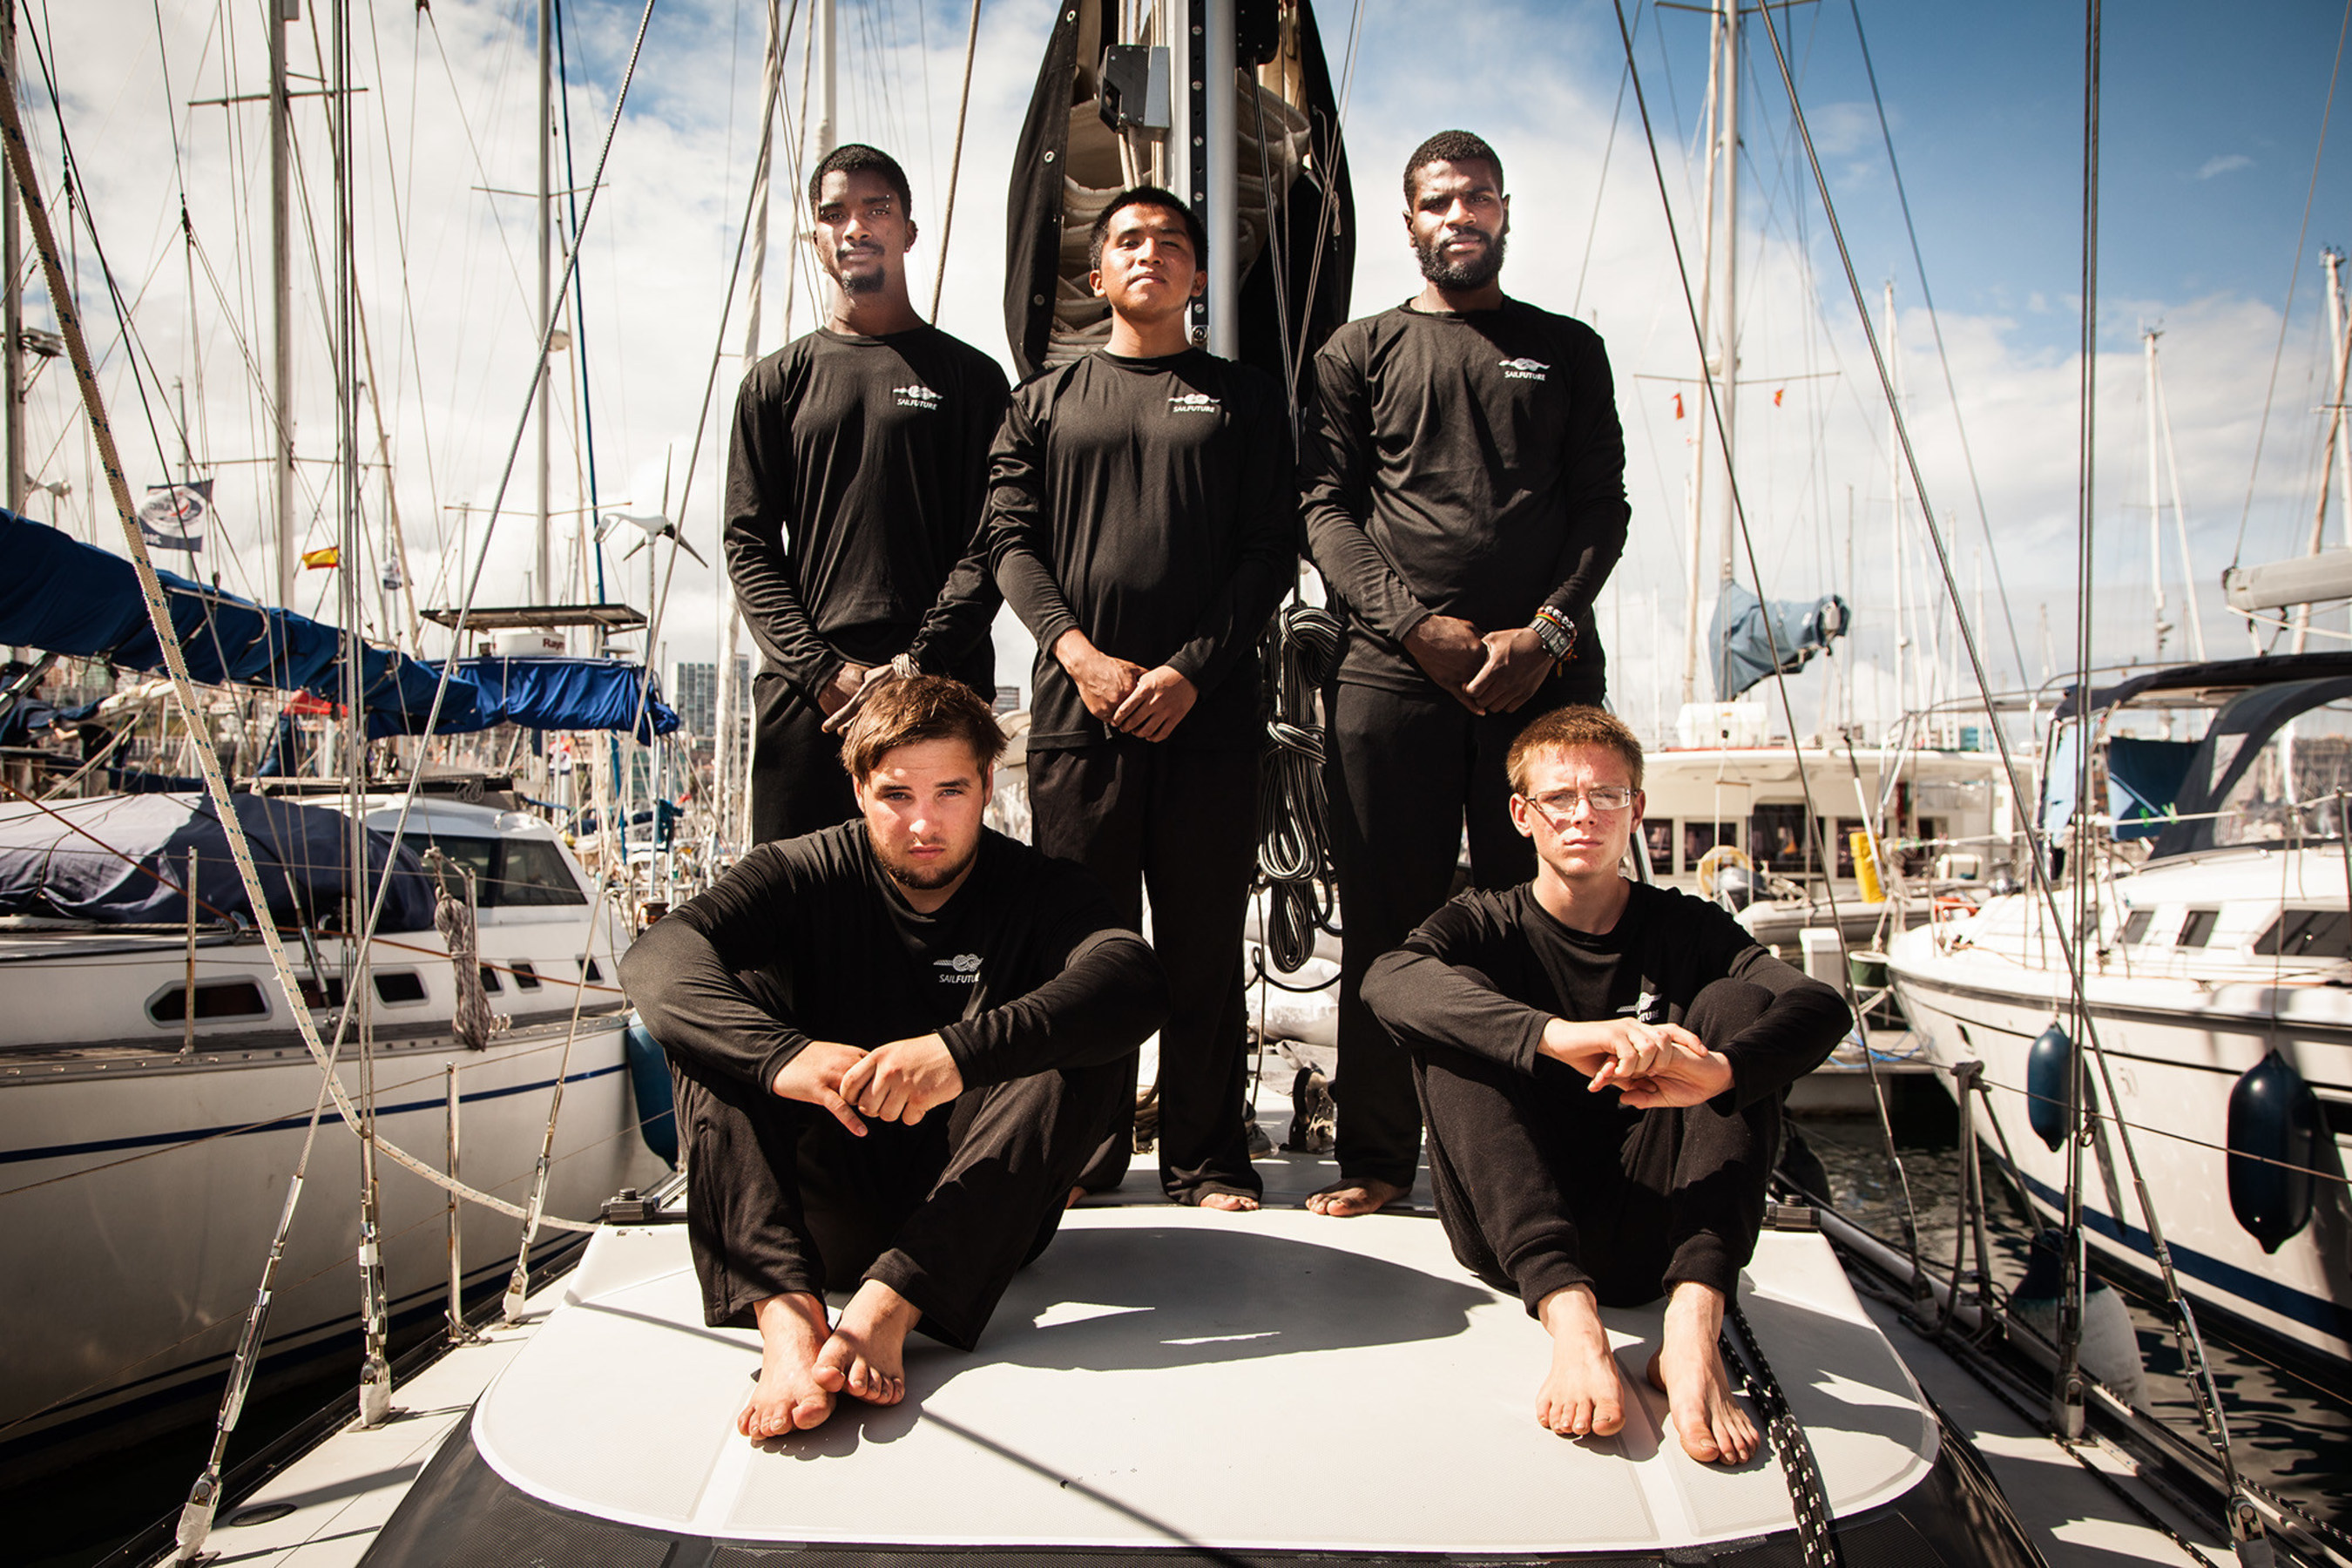 Five juvenile offenders will sail 2,700 nautical miles from the Canary Islands to St. Lucia to prove that even the highest-risk youth are capable of change. Top row, from left to right: Pluto Brown, Ridge Beecher, Dee Davis. Bottom row, from left to right: Tyler Howell, Gavin Bayer.